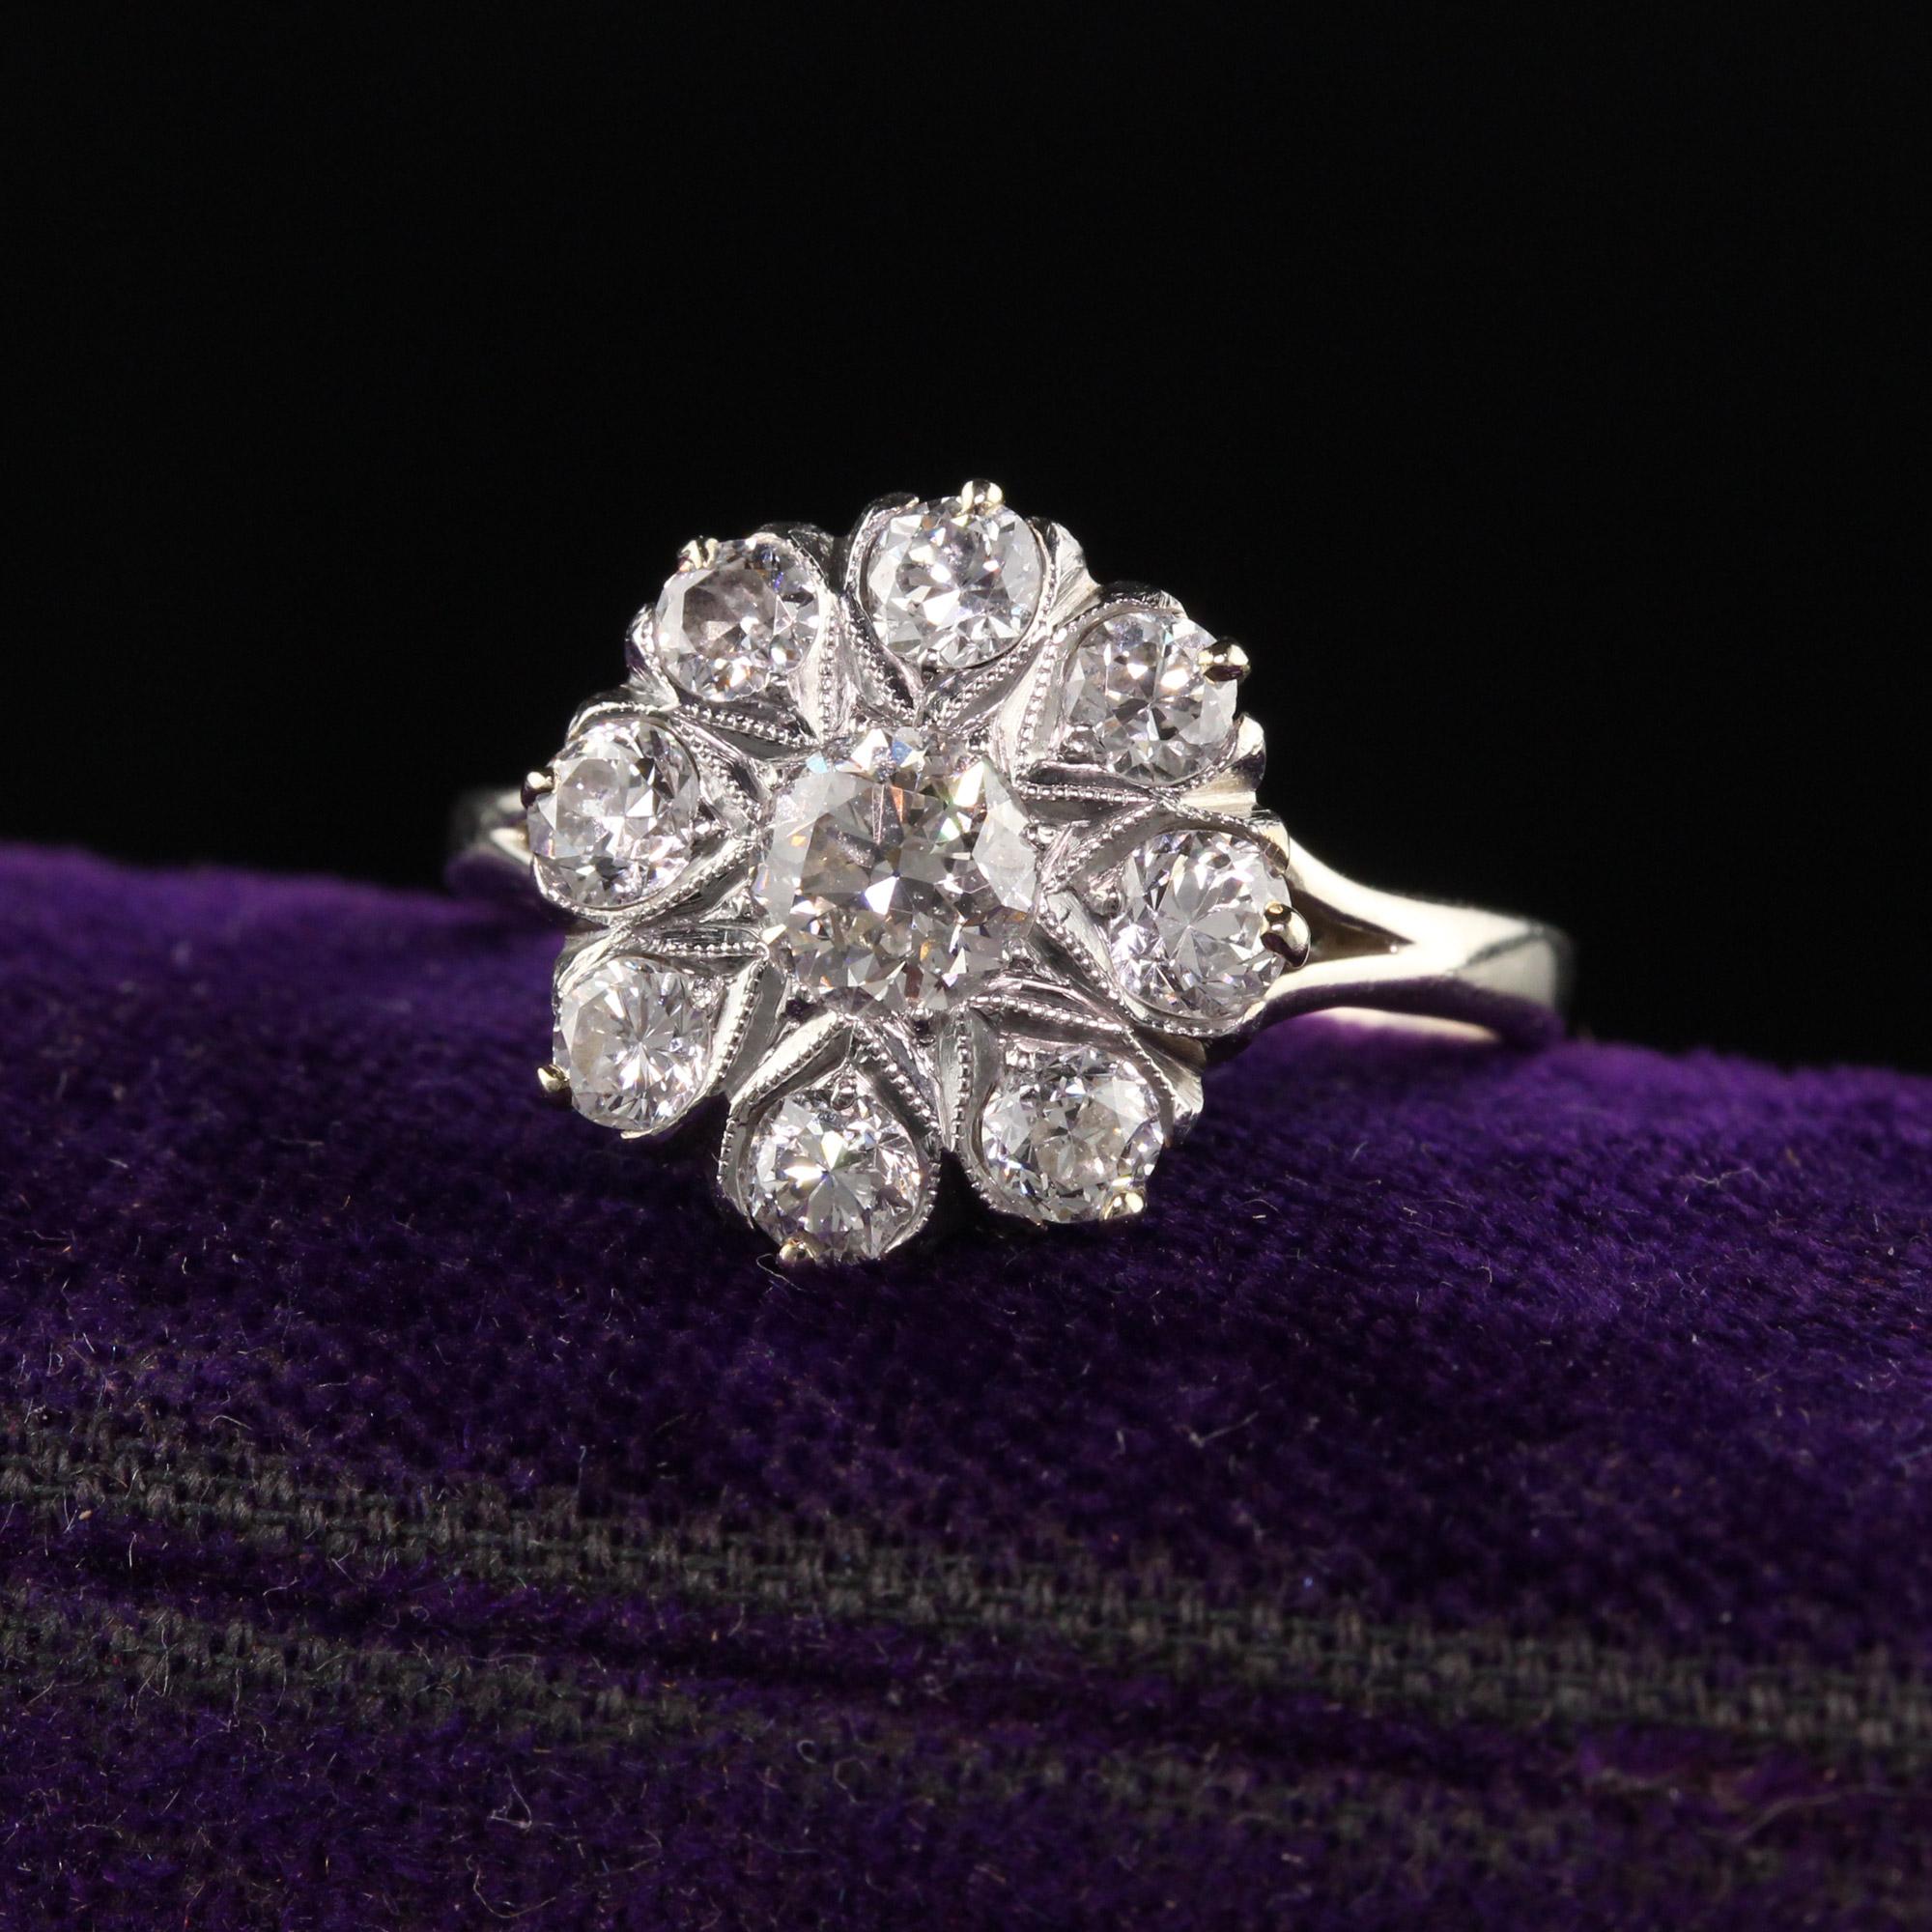 Beautiful Vintage 14K White Gold Old Euro Diamond Cluster Engagement Ring. This gorgeous ring is crafted in 14k white gold. The top has old european cut diamonds set in a flower pattern and sits low on the finger. It is in great shape and very